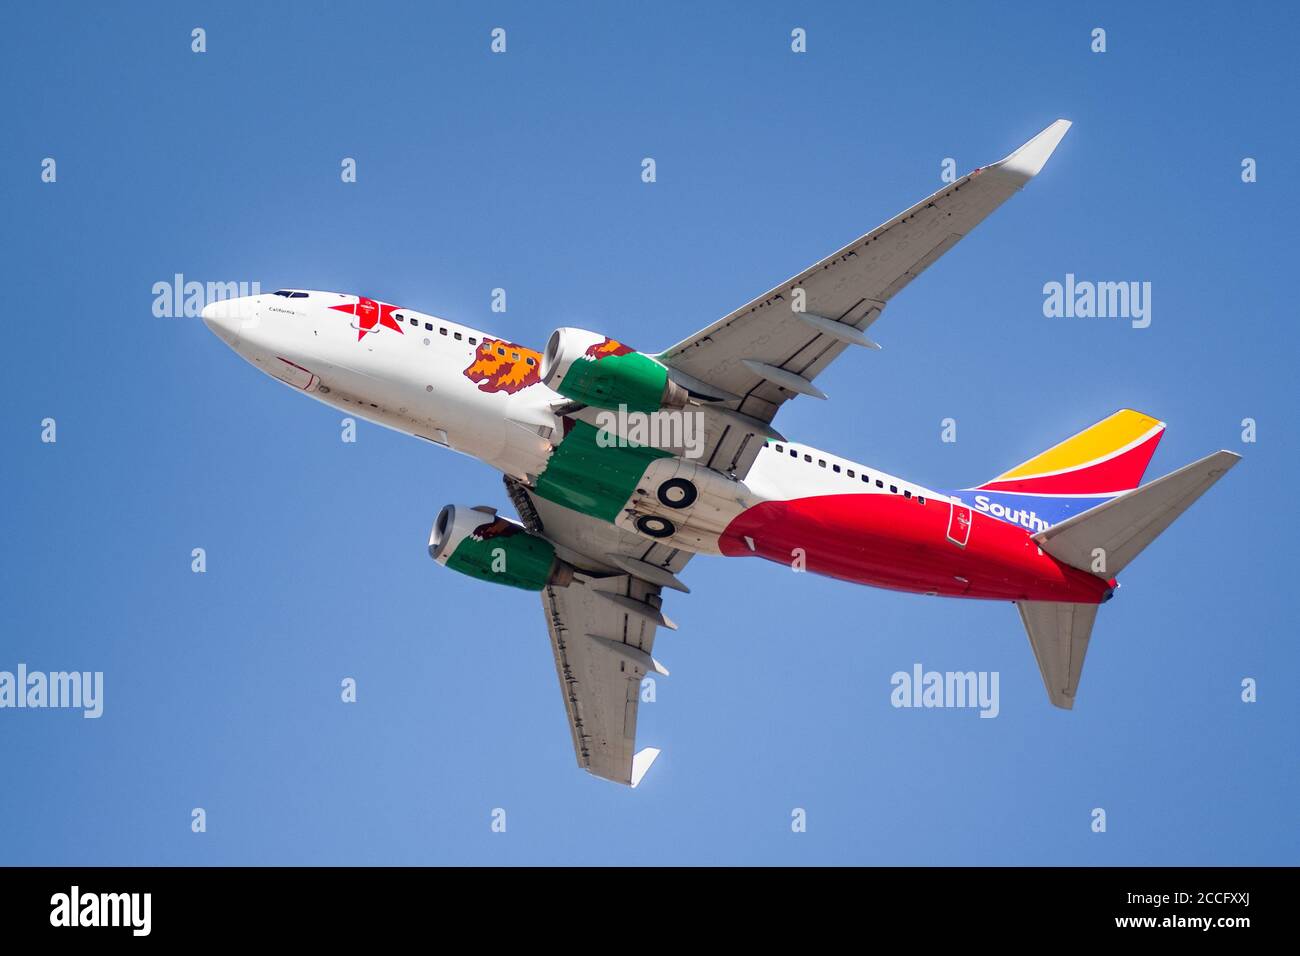 August 7, 2020 San Jose / CA / USA - California One Southwest Airlines taking off from San Jose International Airport (SJC); California One livery is Stock Photo